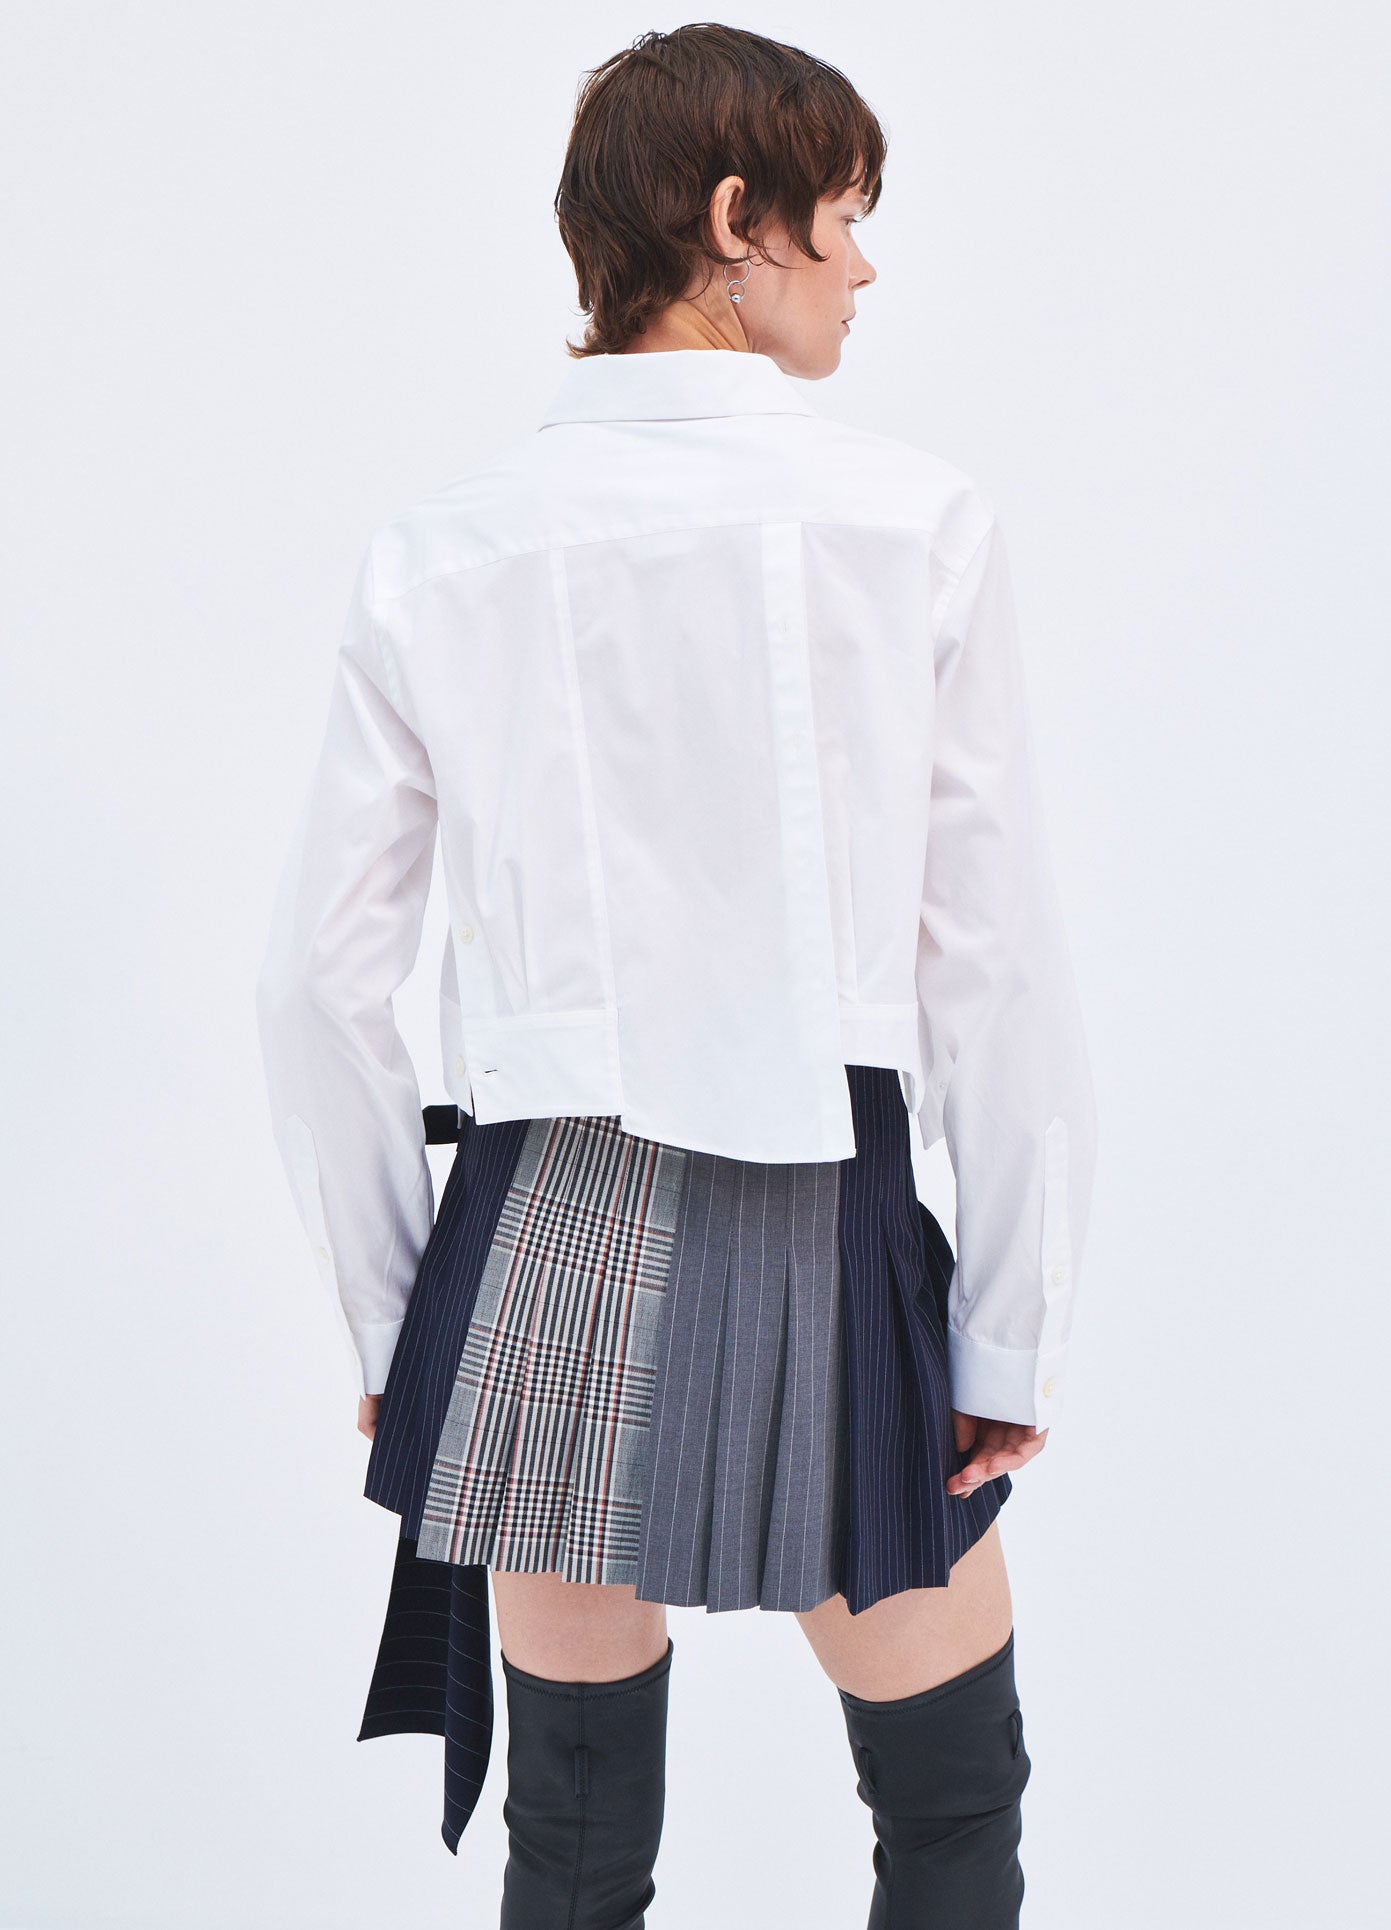 MONSE Spring 2024 Deconstructed Cropped Button Down in Ivory on model back view